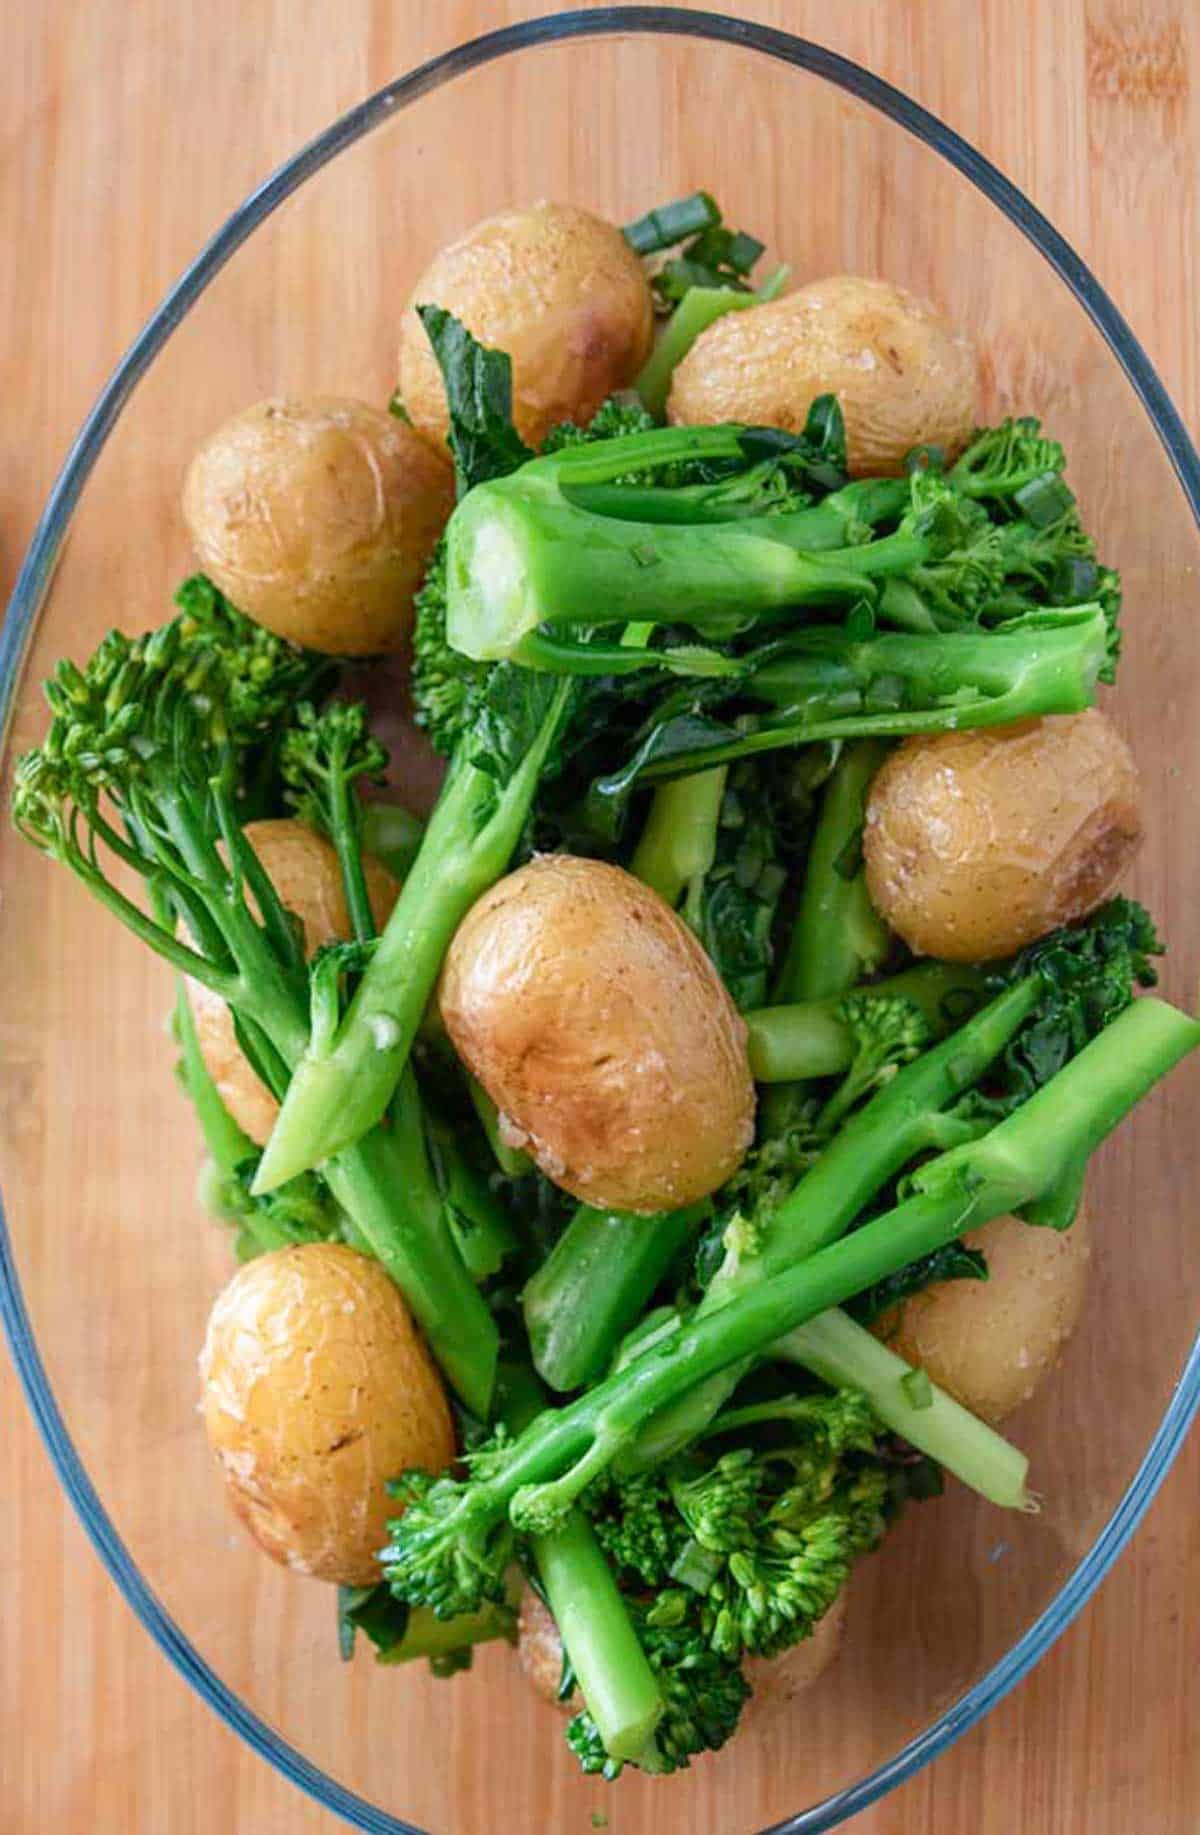 A bowl of broccoli and potatoes on a wooden table.